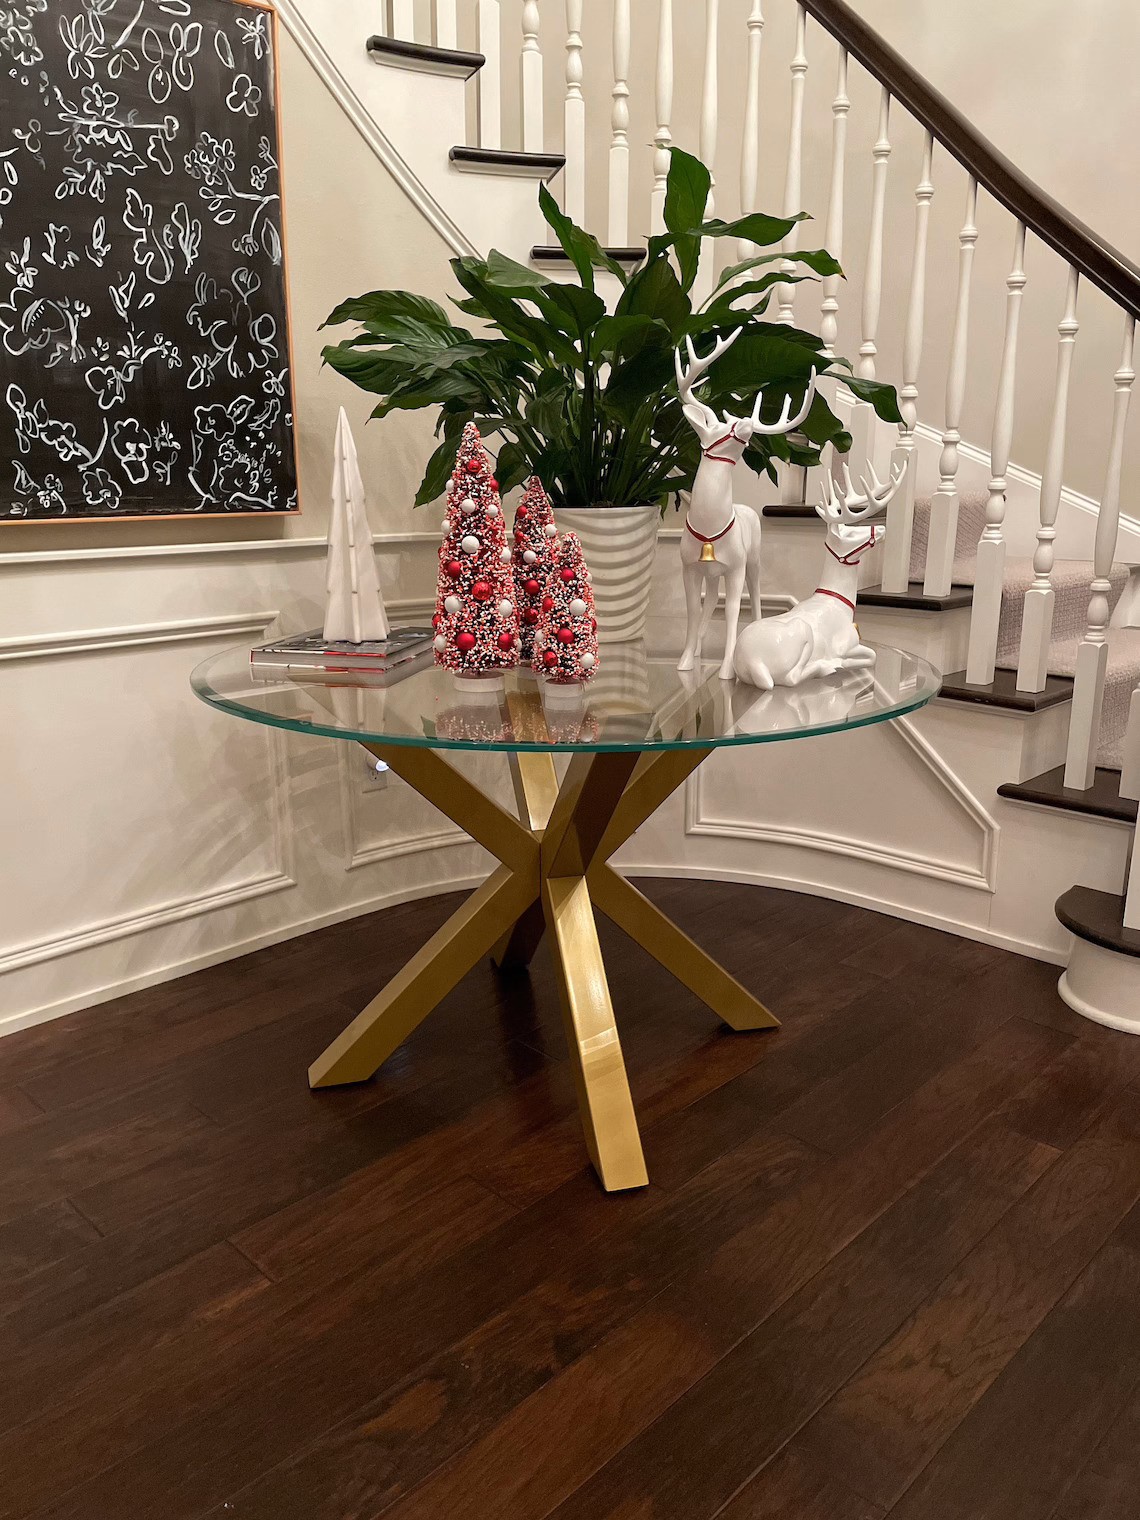 A gilded, glam dining table base